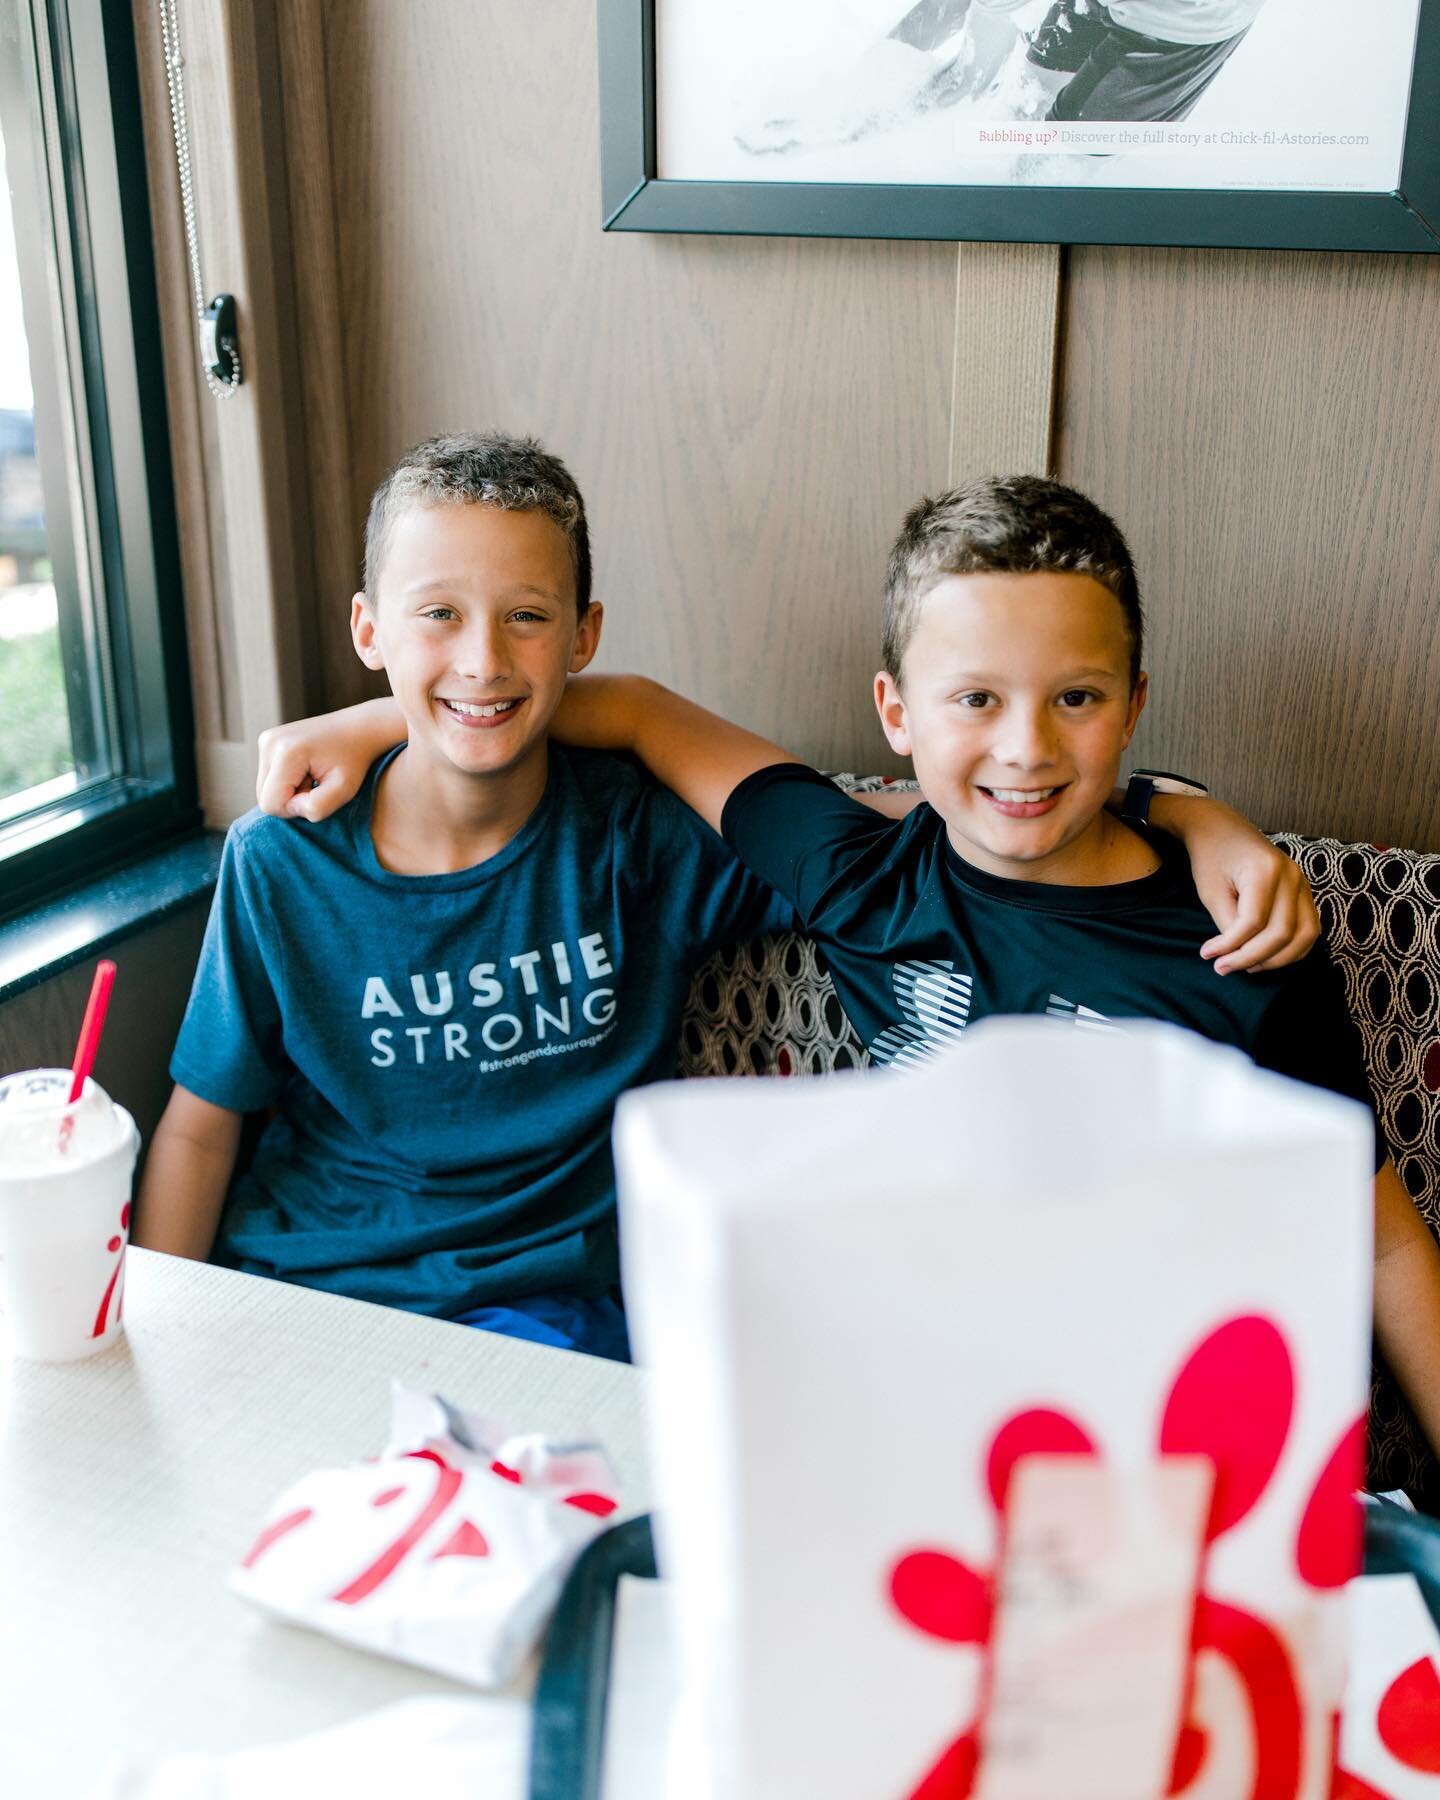 Nothing brings a smile to our faces like having guests in our dining room&mdash; especially families! Tag a sibling &amp; tell them you love them today! 🥰 #thelittlethings